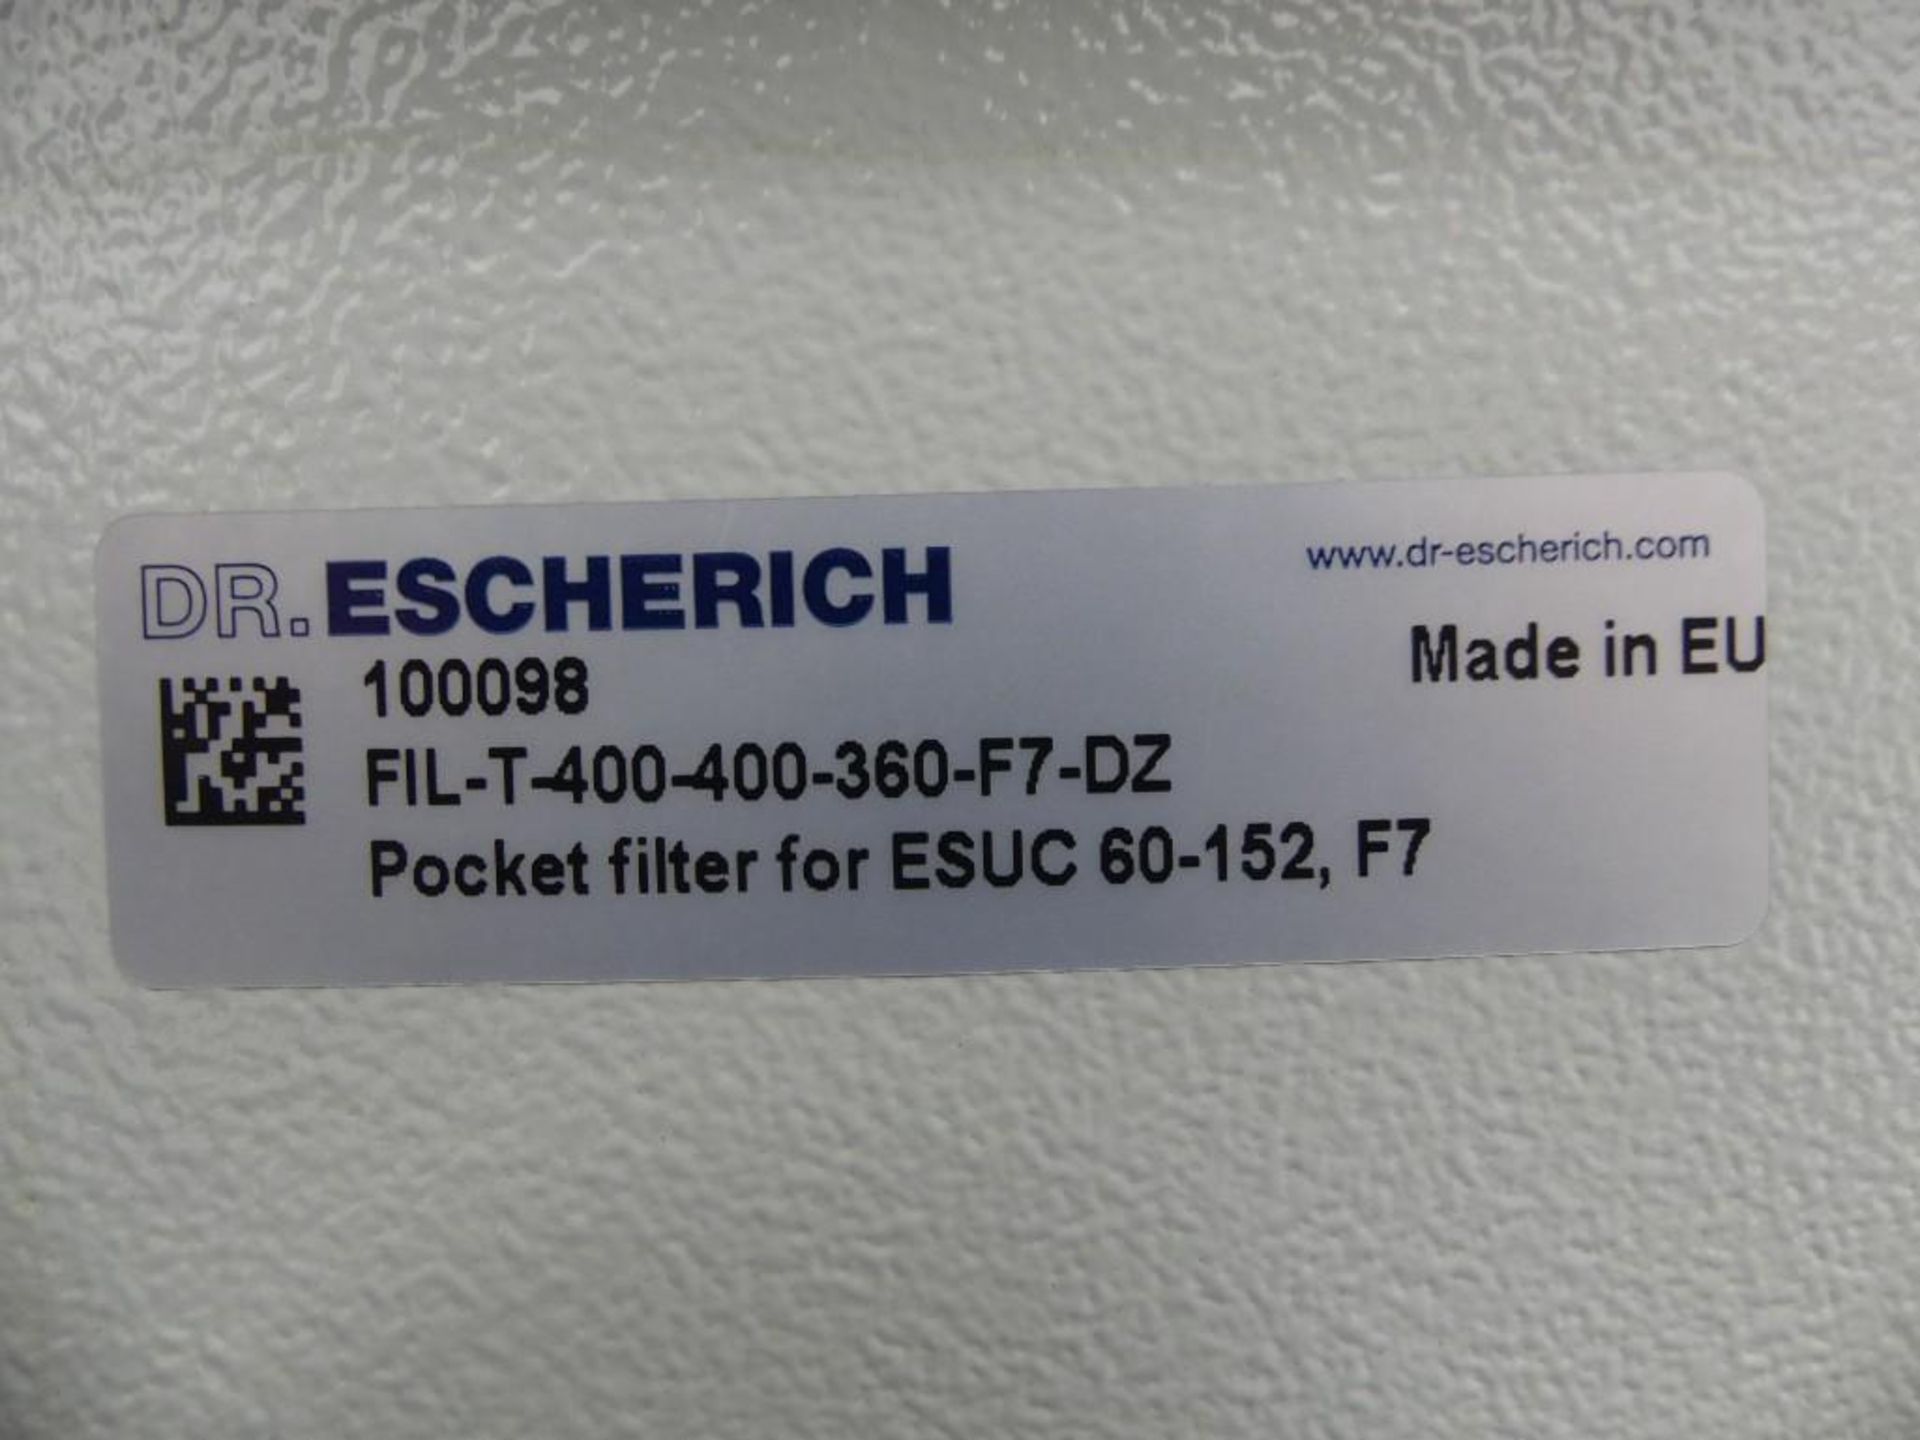 Escherich ESUC 112 Pharmaceutical Dust Collector - Image 18 of 22